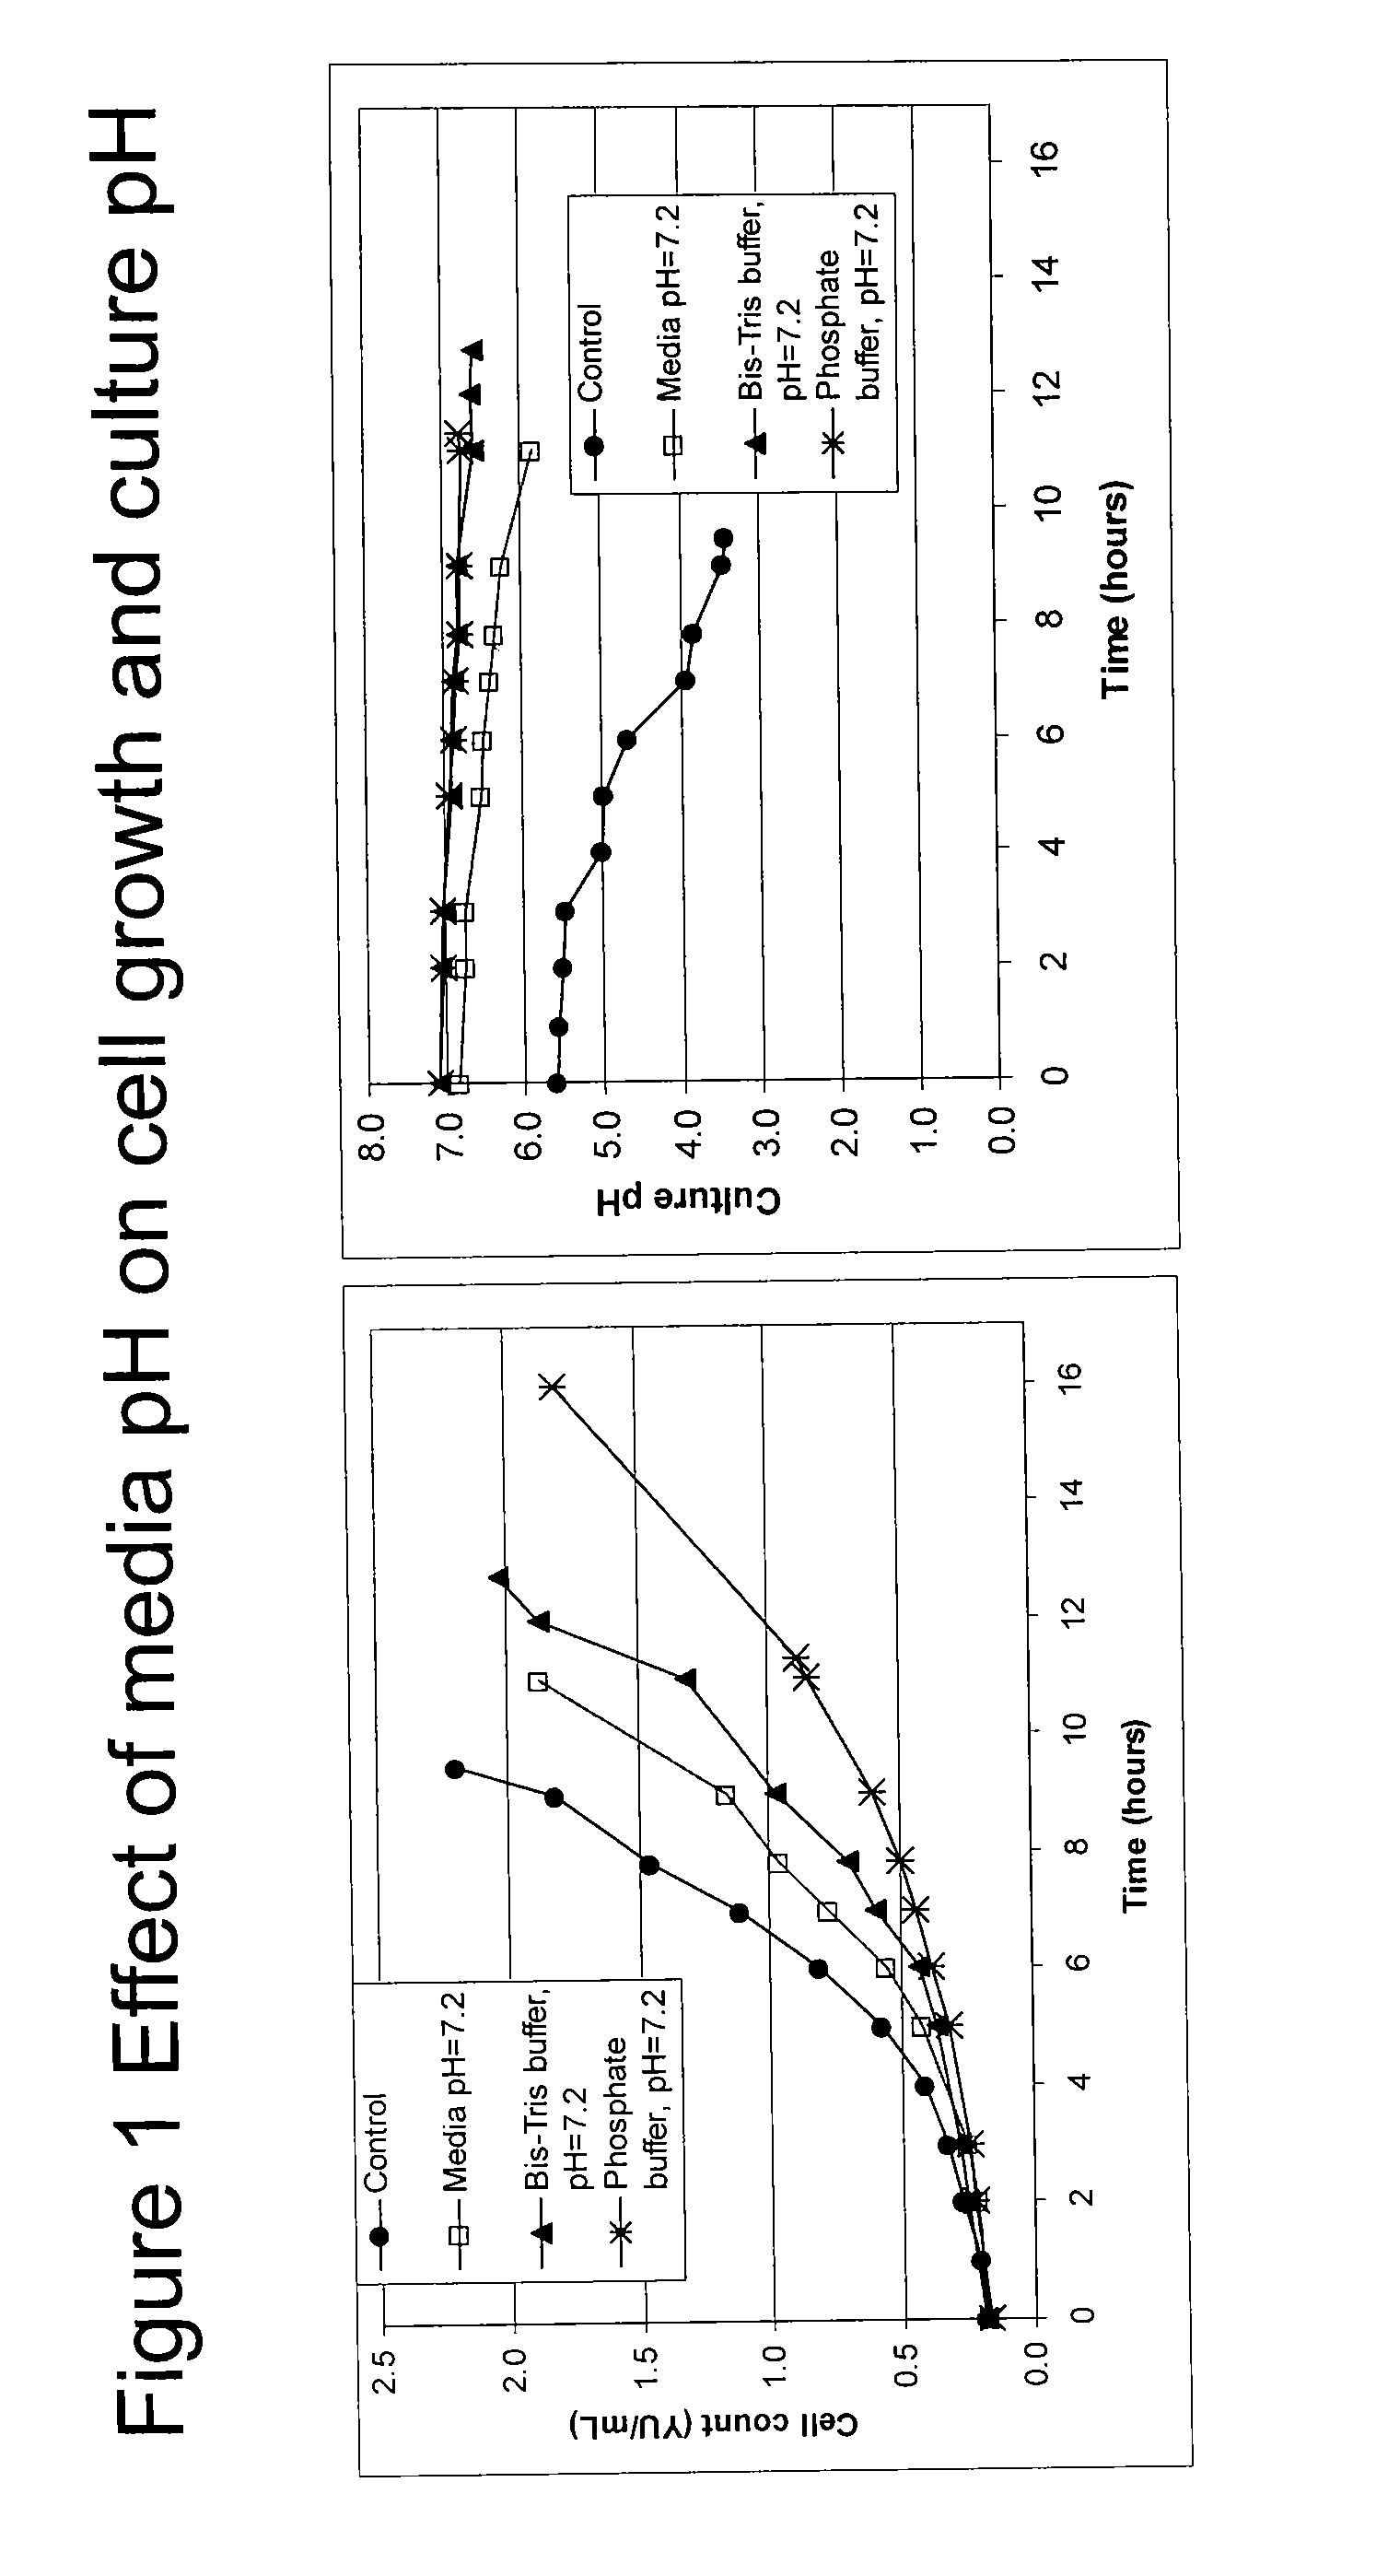 Methods for producing yeast-based vaccines